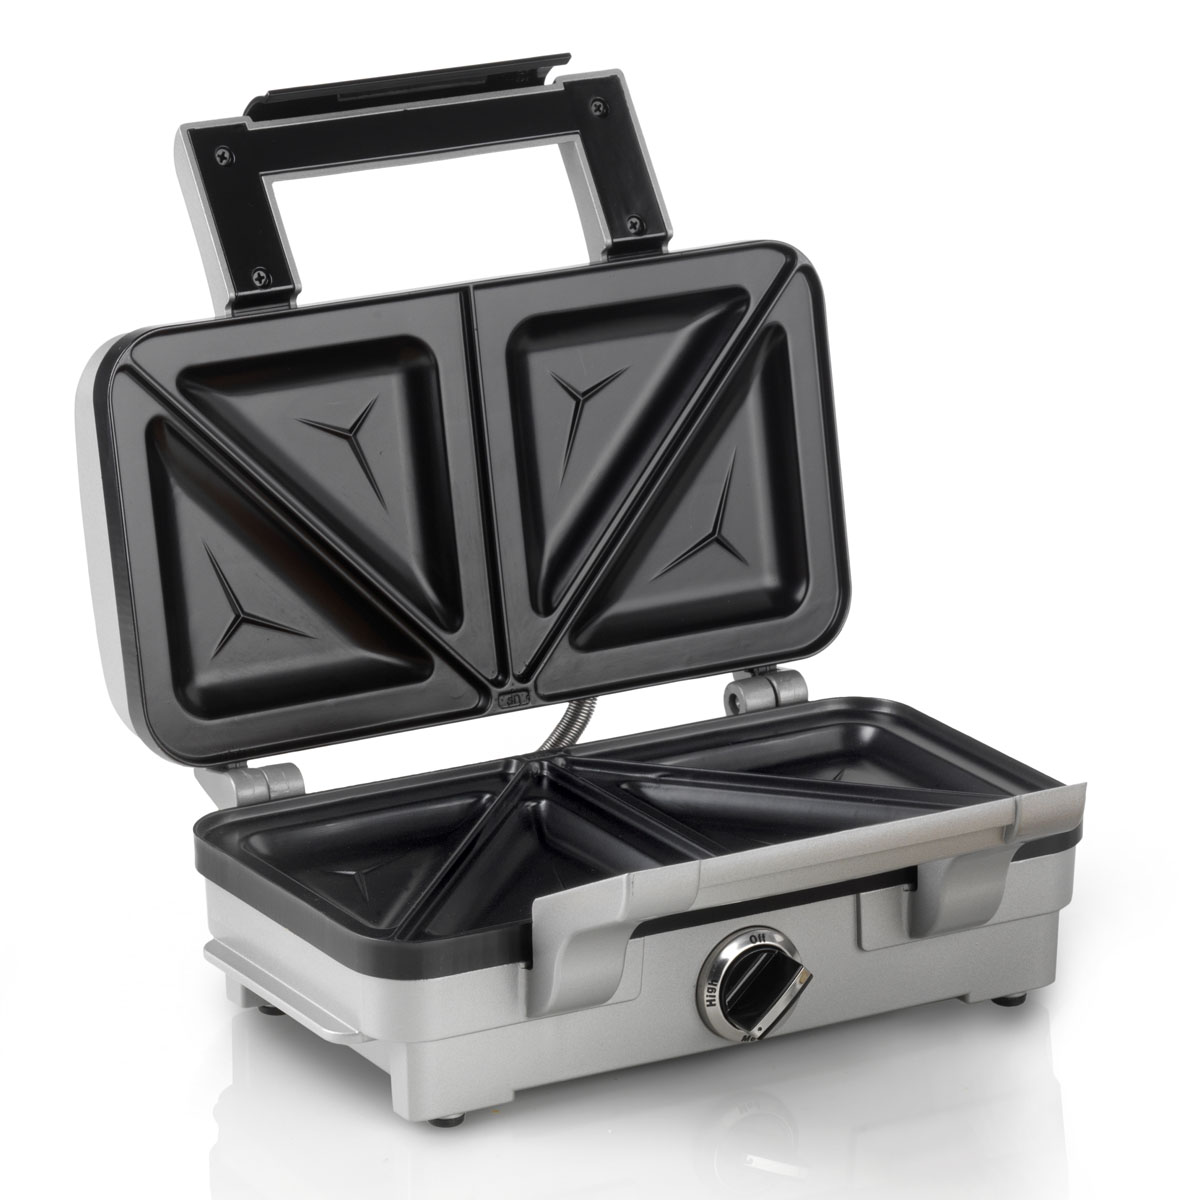 Cuisinart 2-In-1 Waffle Maker With Removable Plates